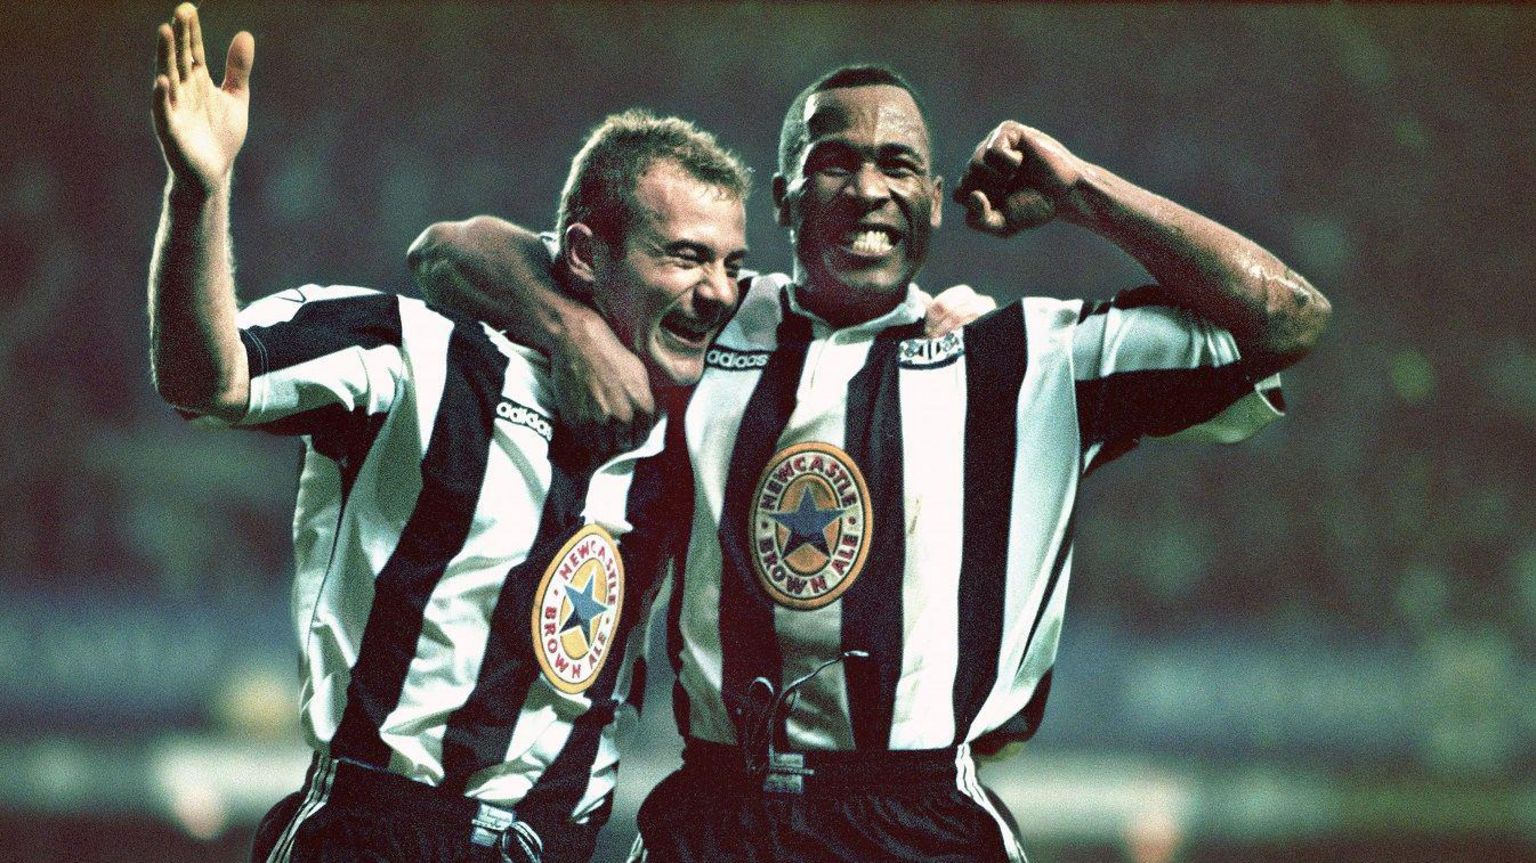 Newcastle's Alan Shearer (left) and Les Ferdinand celebrate a goal in a 5-0 win over Manchester United in October 1996